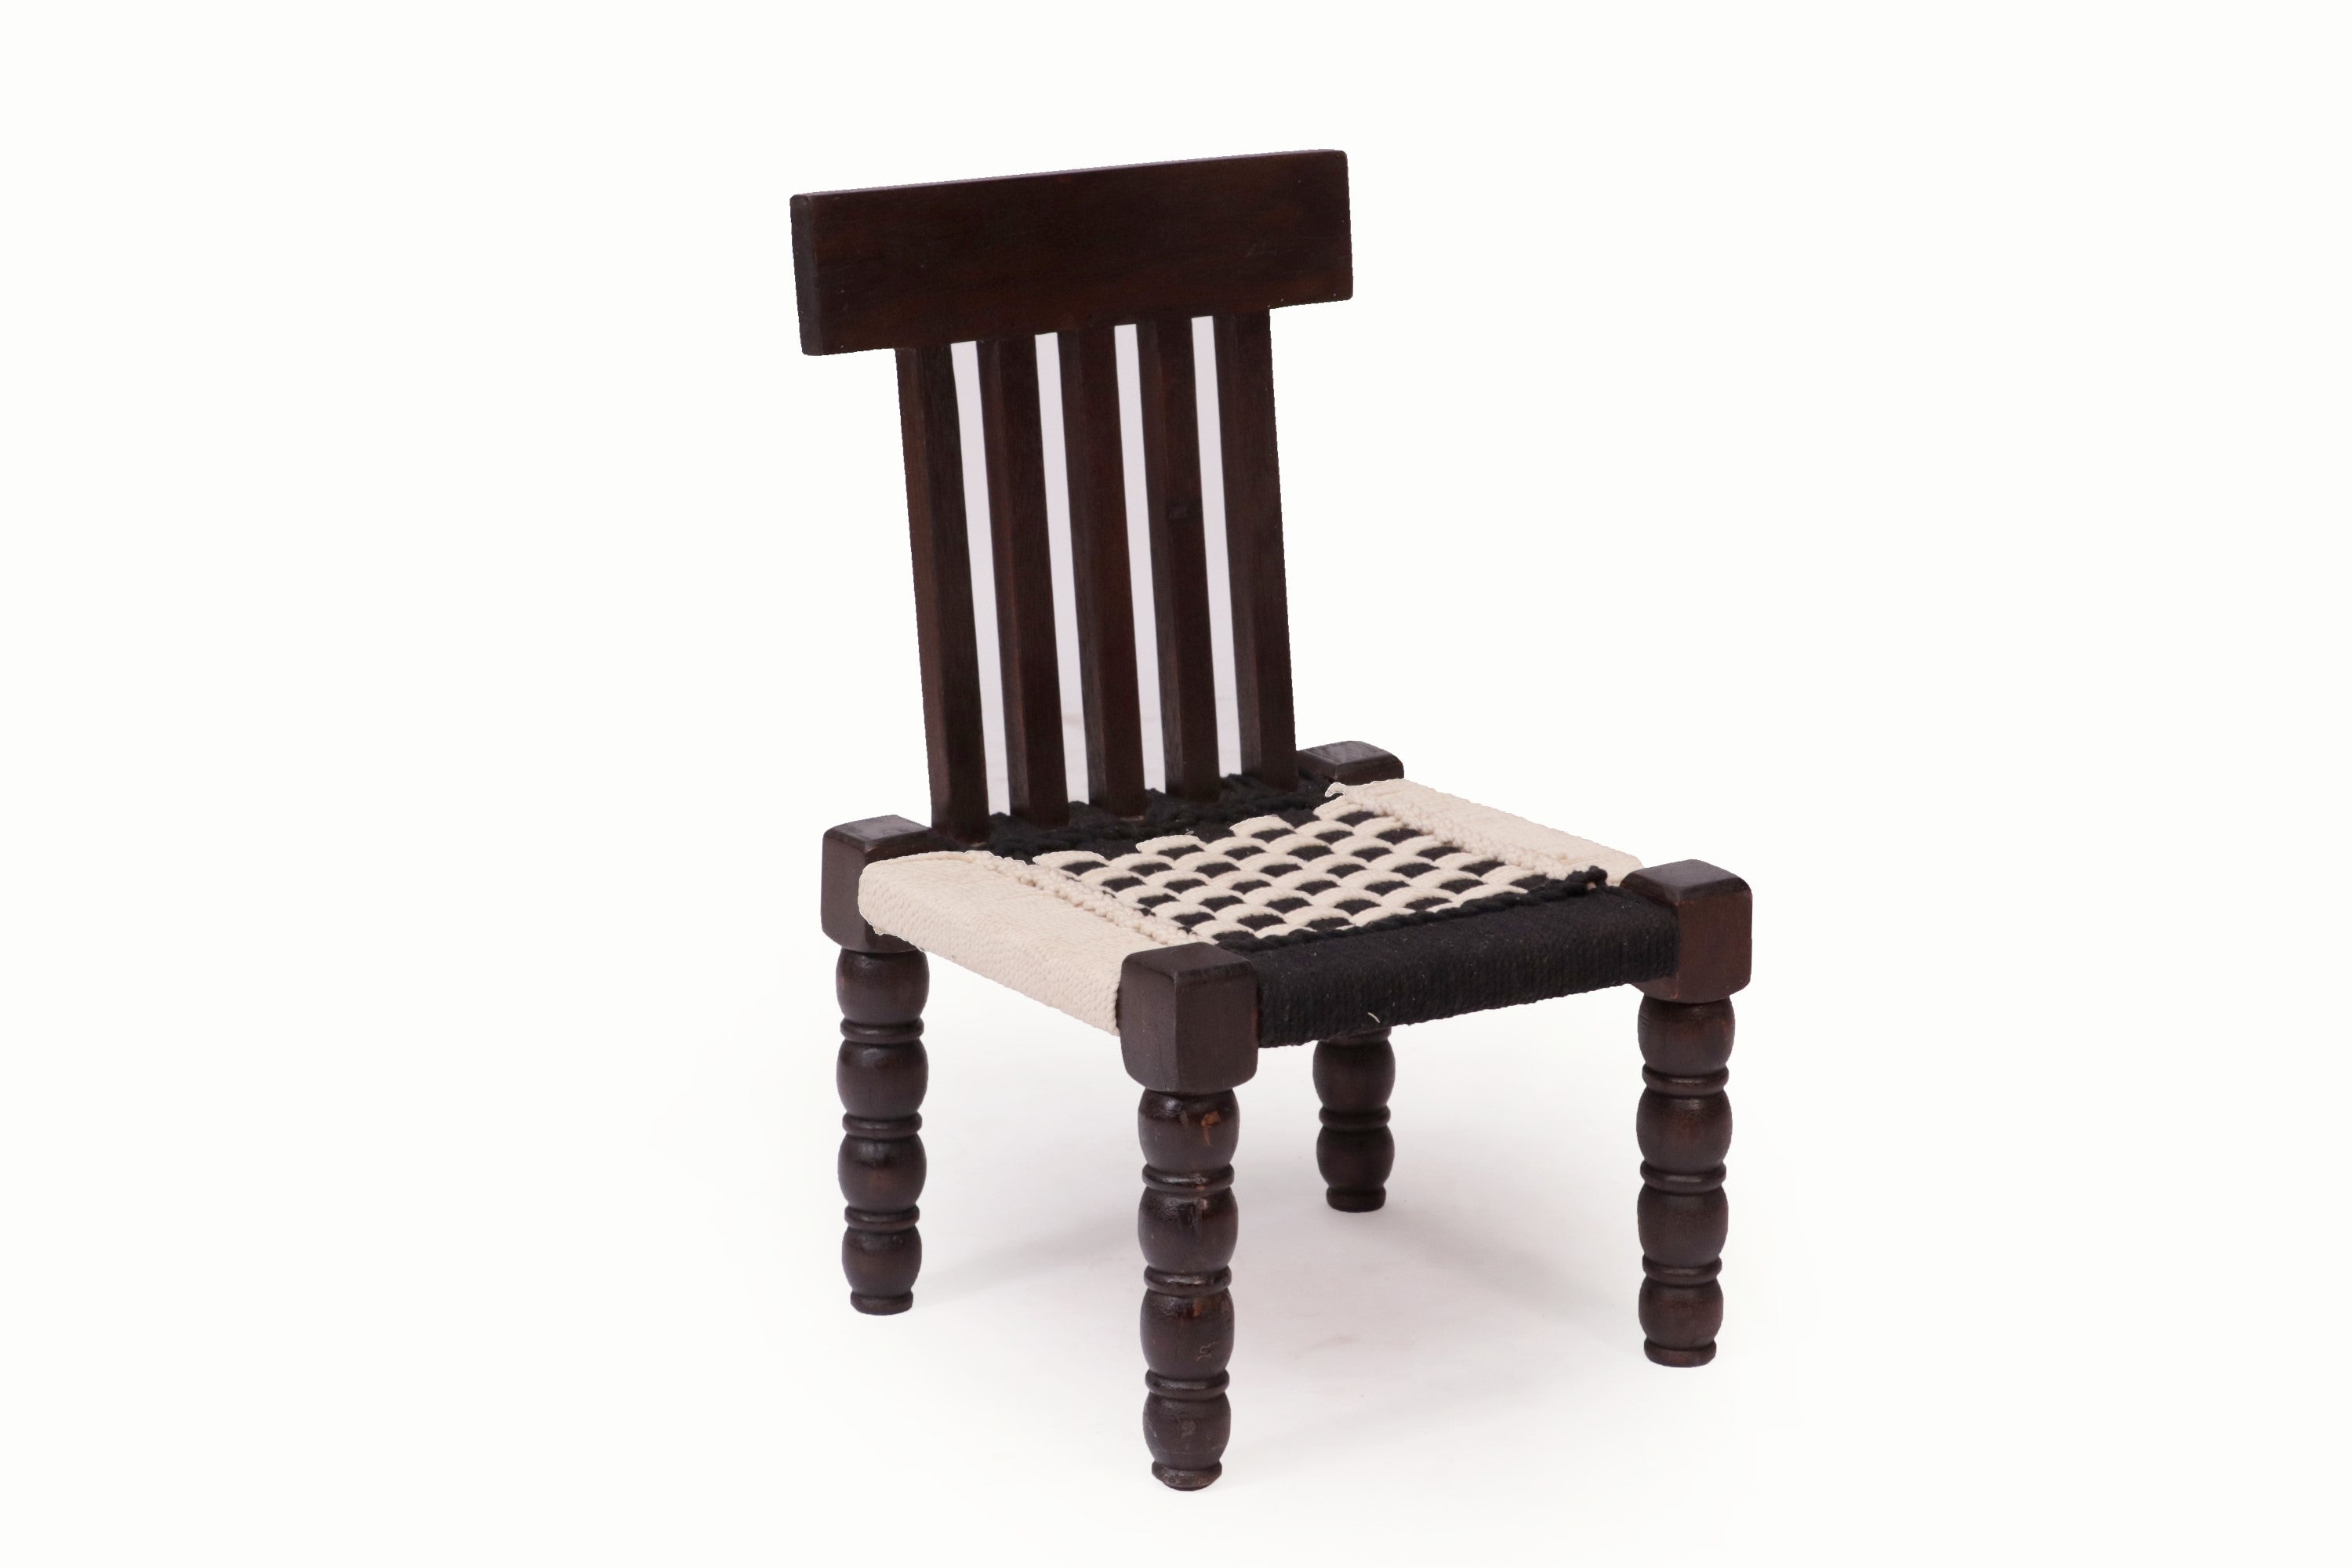 Woven Seat Low Chair Stool